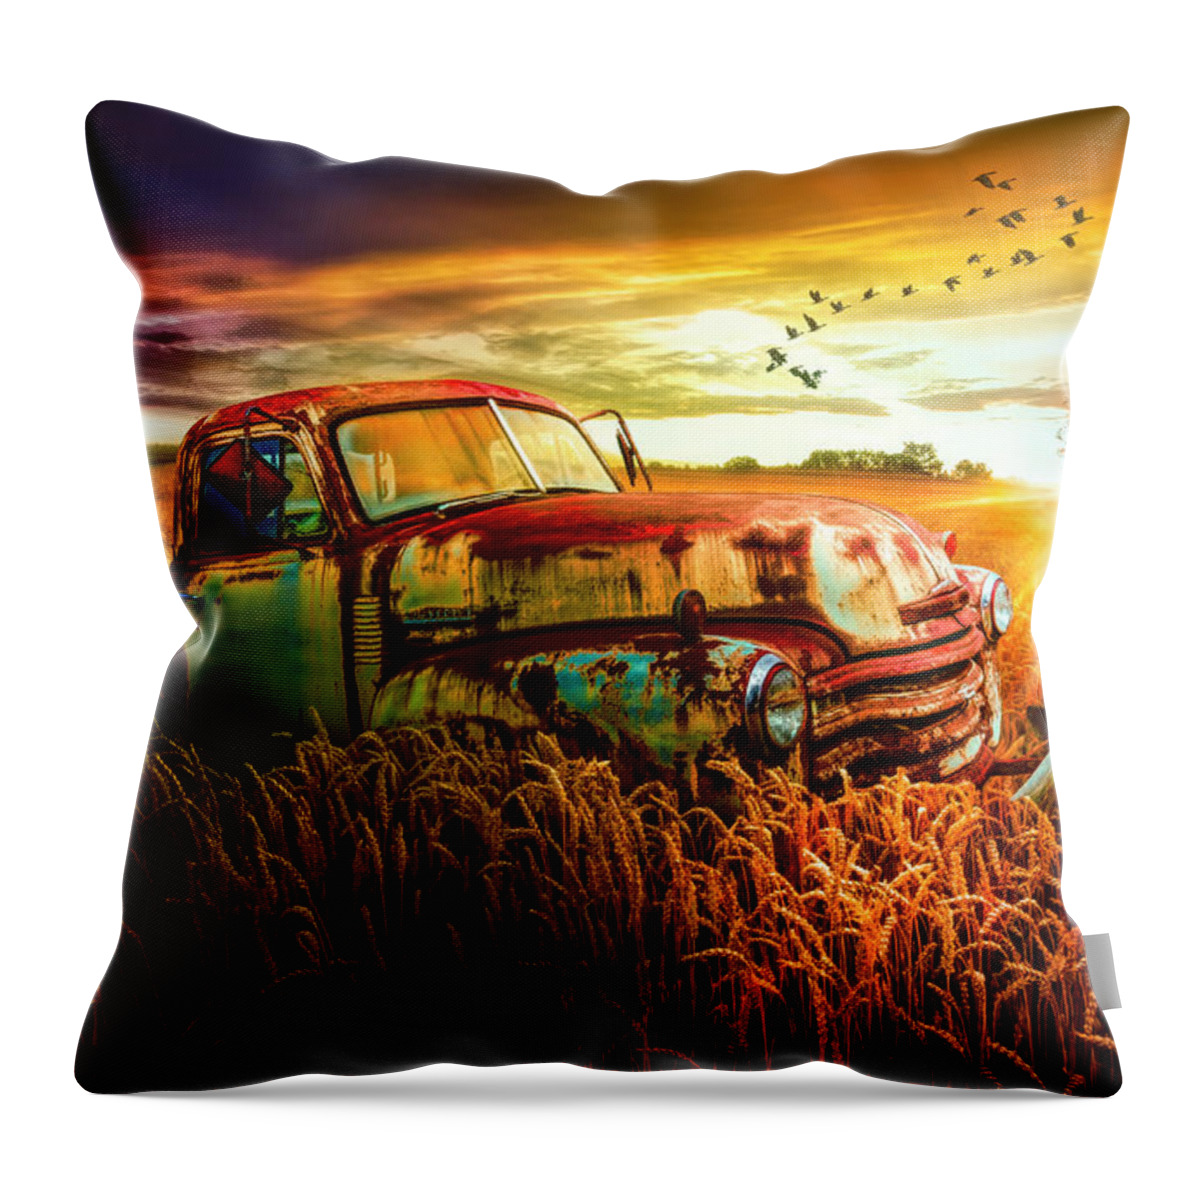 1947 Throw Pillow featuring the photograph Old Chevy Truck in the Sunset by Debra and Dave Vanderlaan